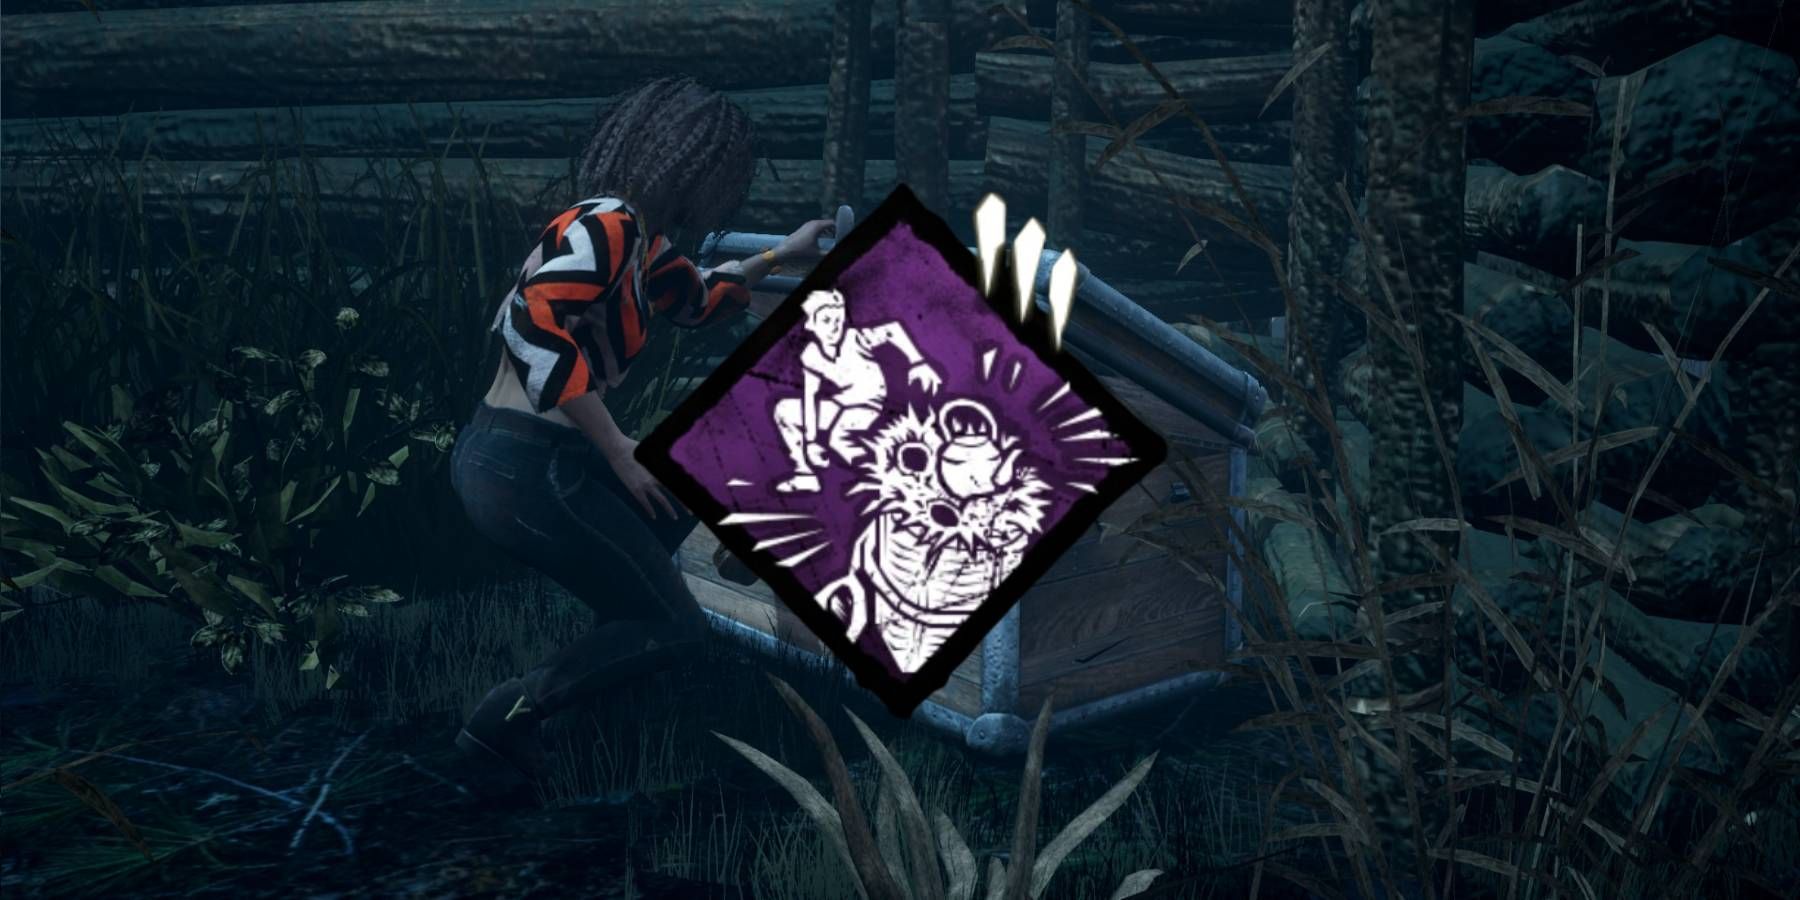 Elodie opening a chest with the Hoarder emblem from Dead by Daylight